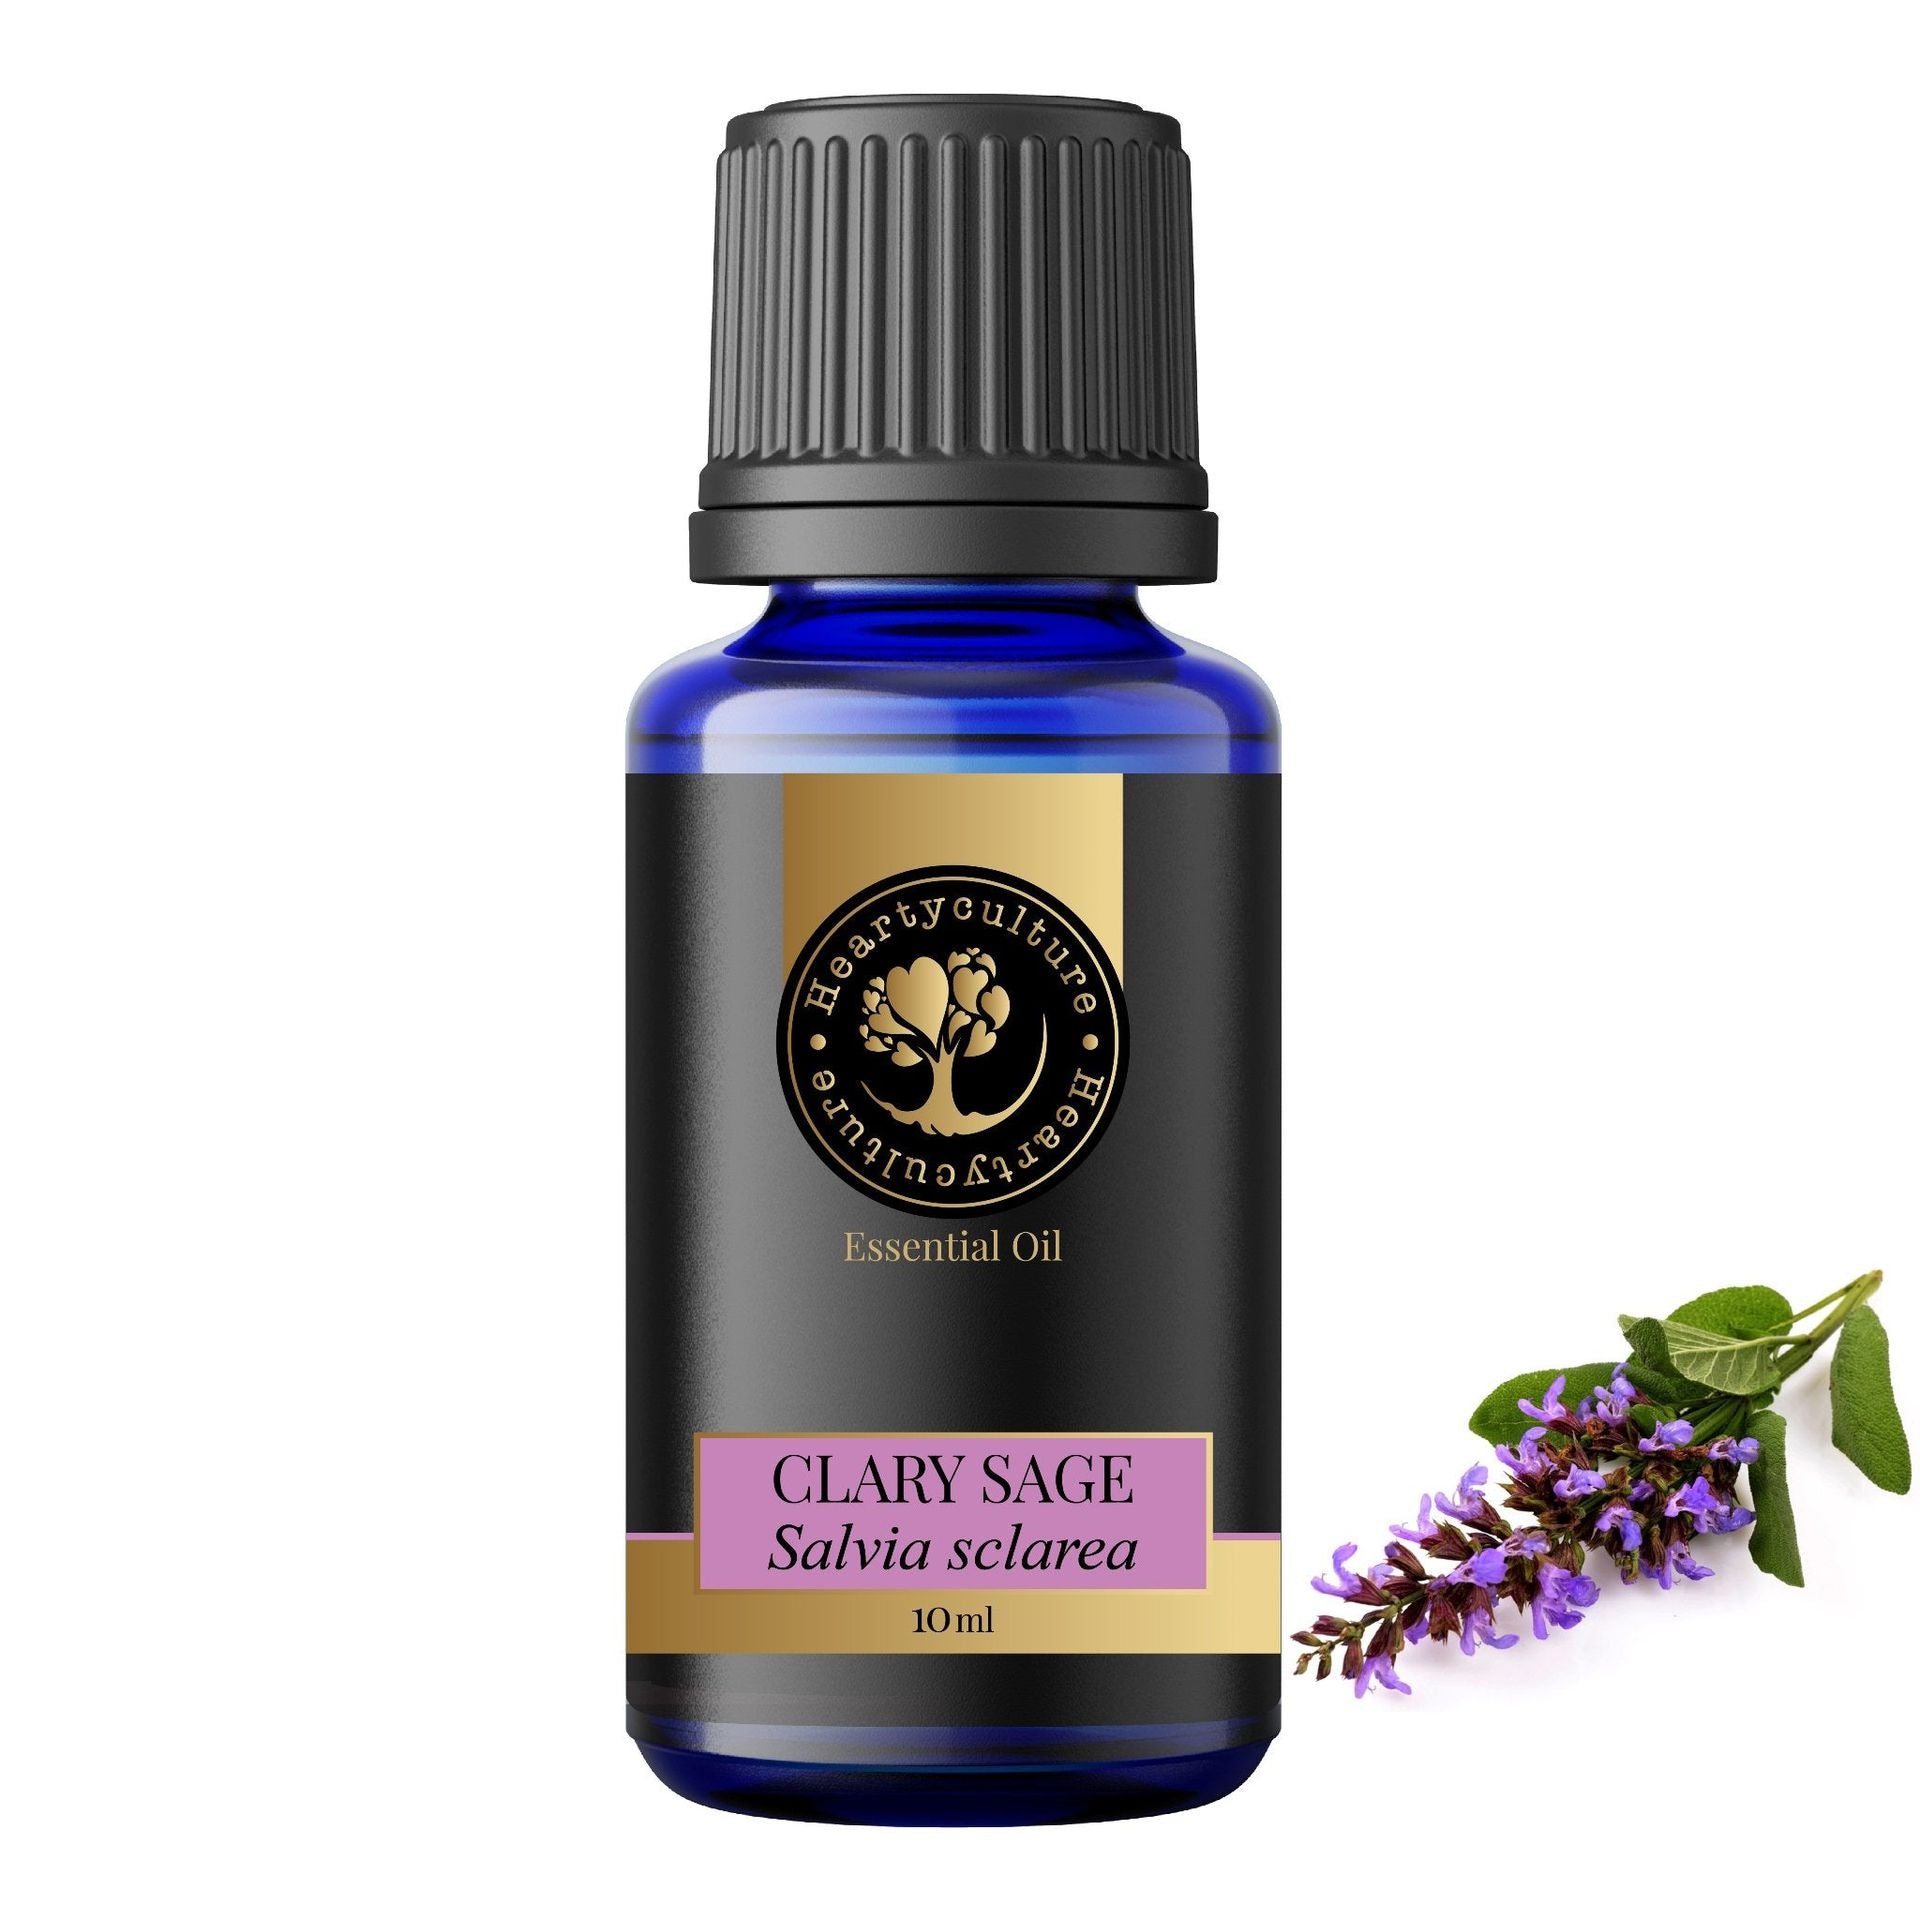 Heartyculture Clary Sage Essential Oil - 10 ml - hfnl!fe